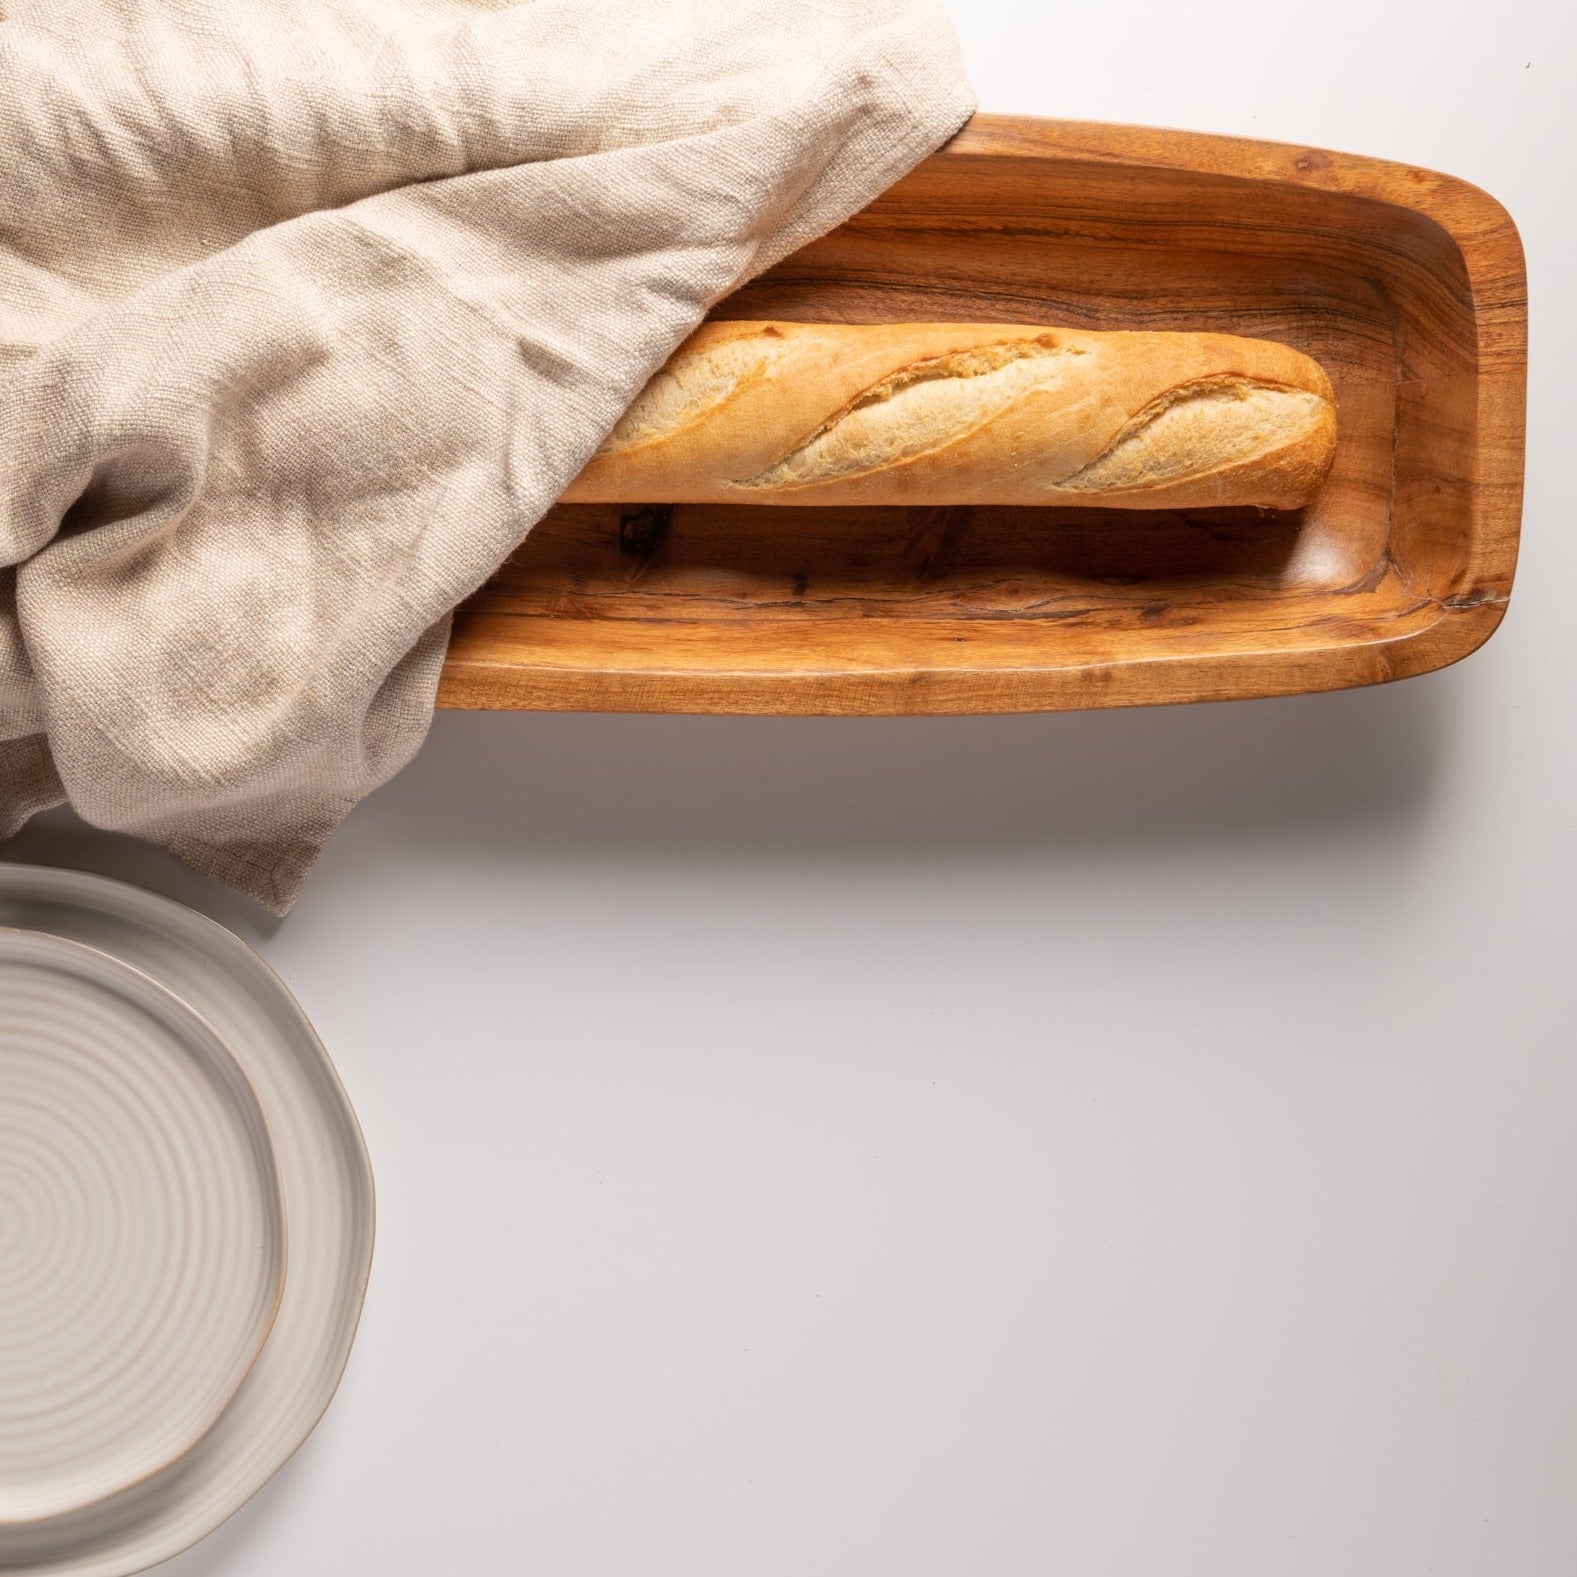 top view of table with wooden bowl filled with loaf of bread wrapped in a towel.